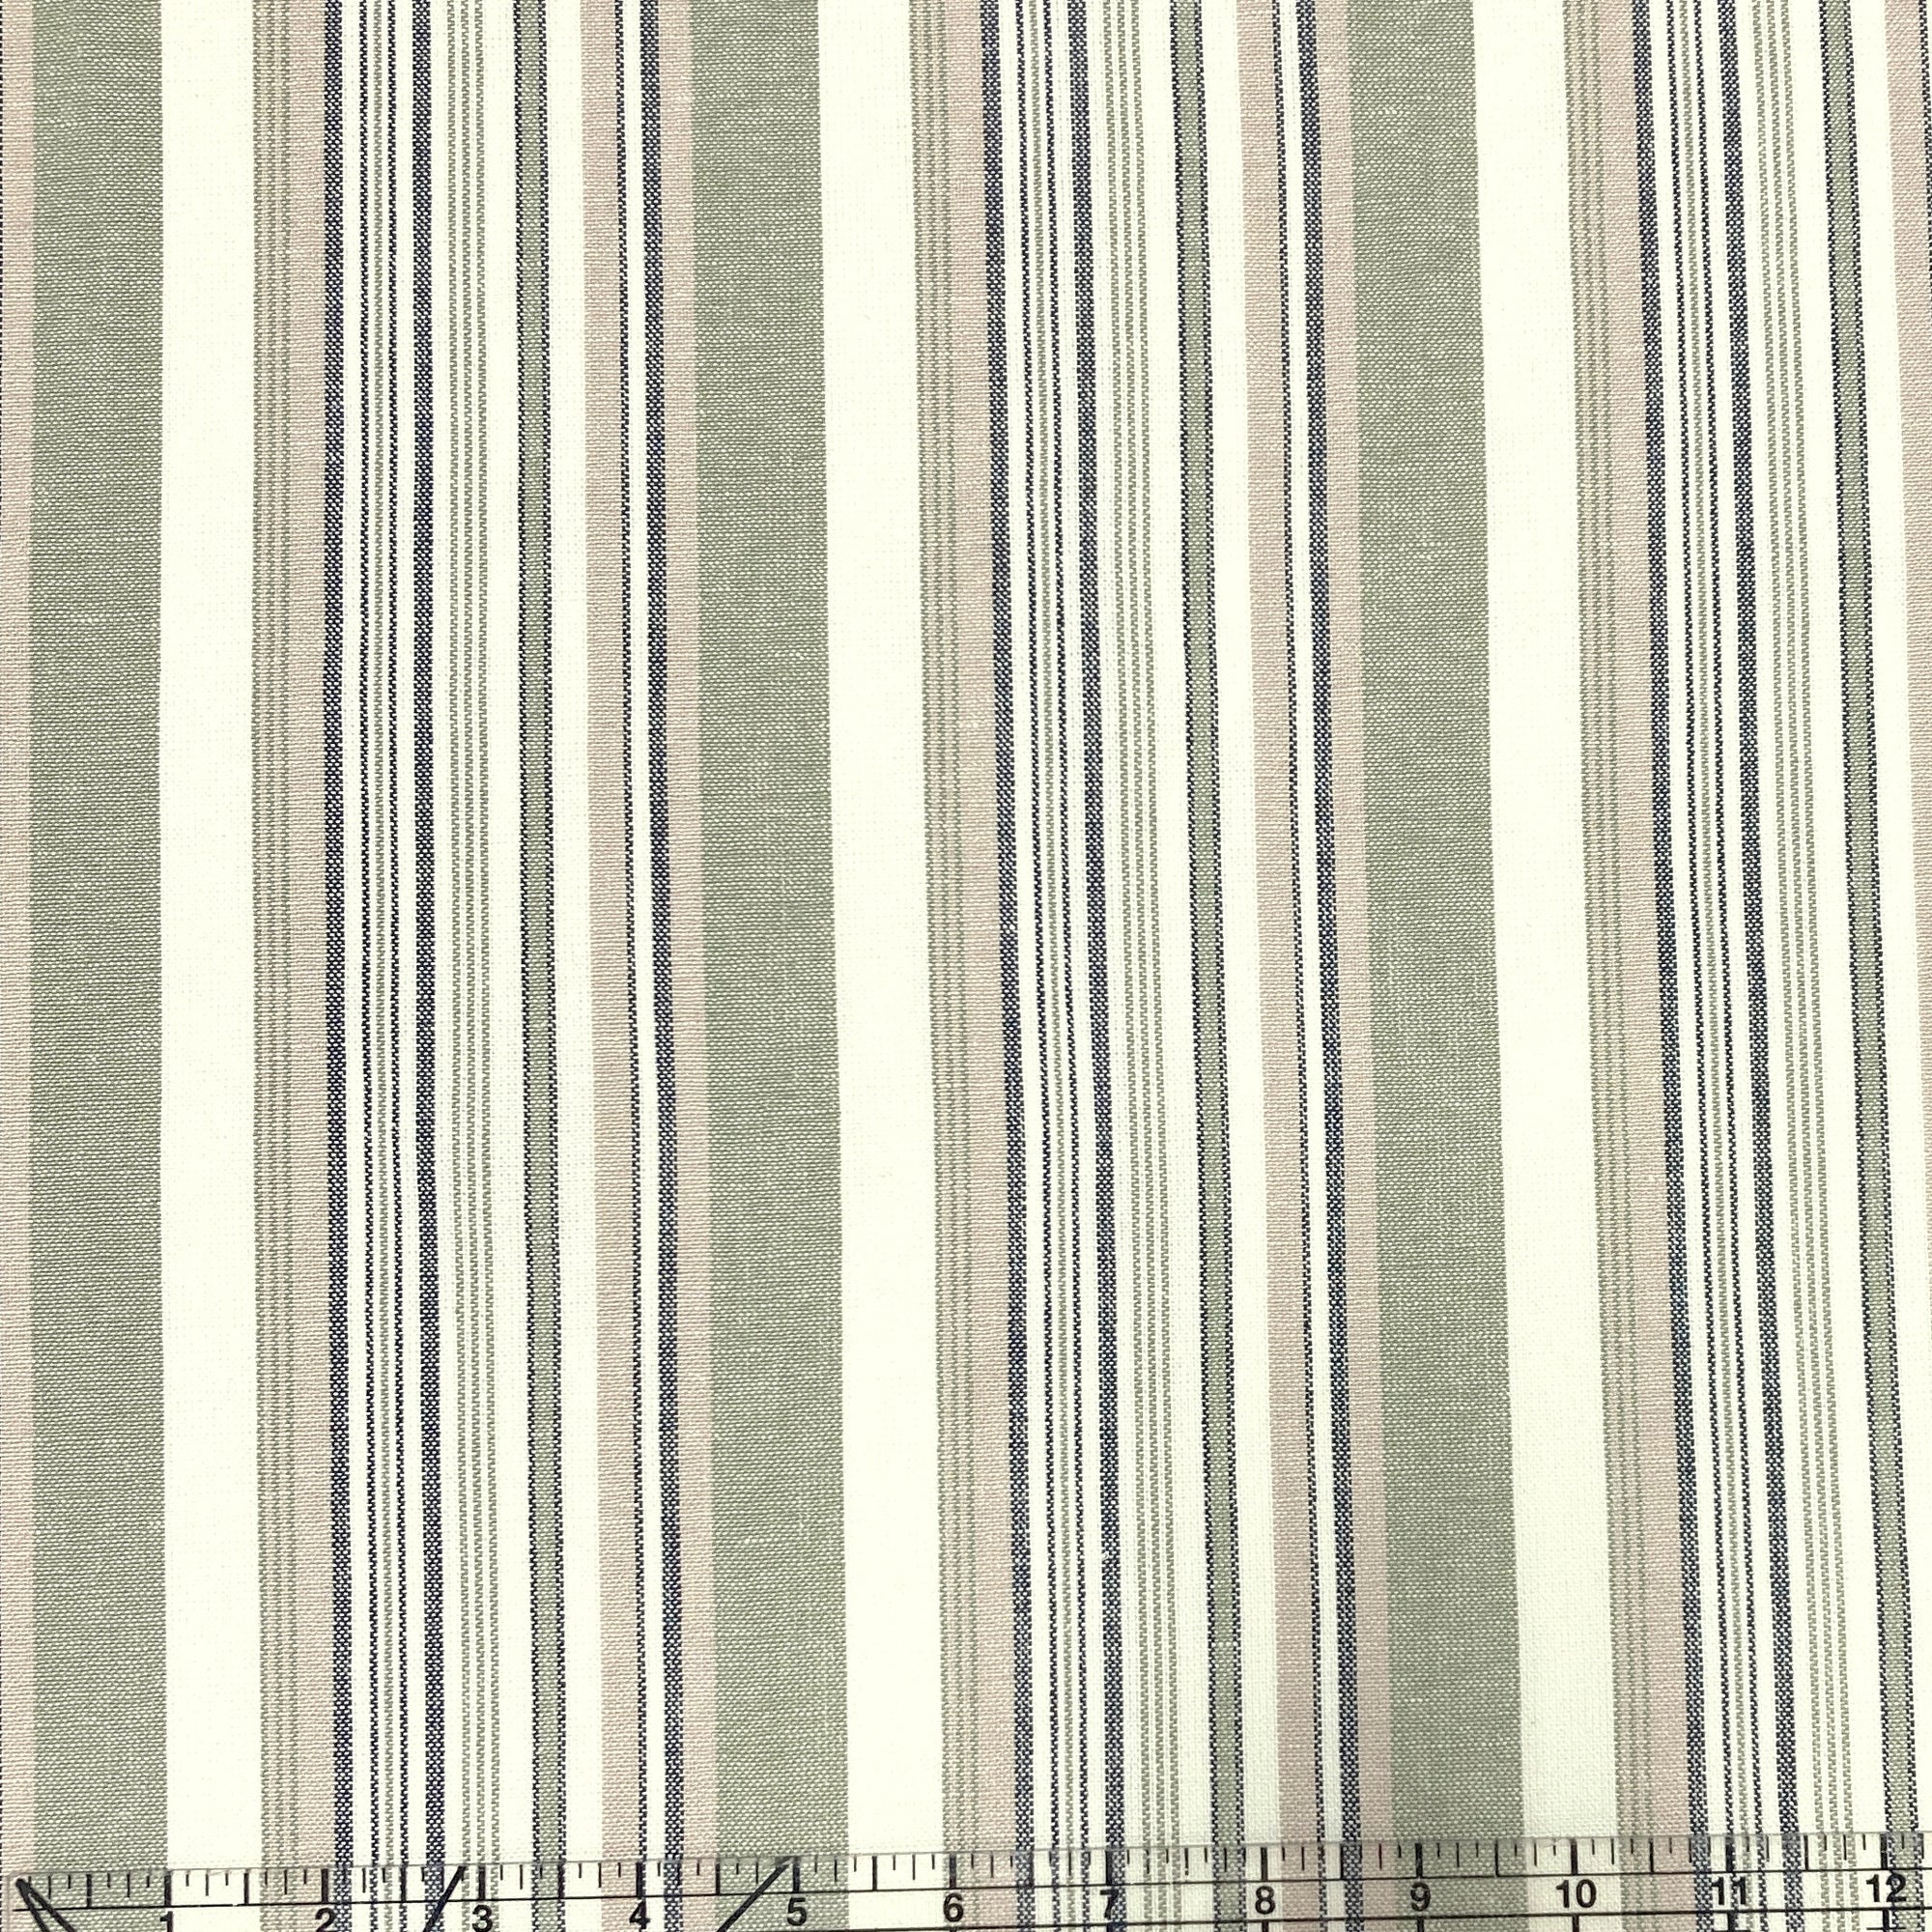 Sage Green Black and Off White Yarn Dyed Vertical Stripe Light to Medium Weight Rayon Linen